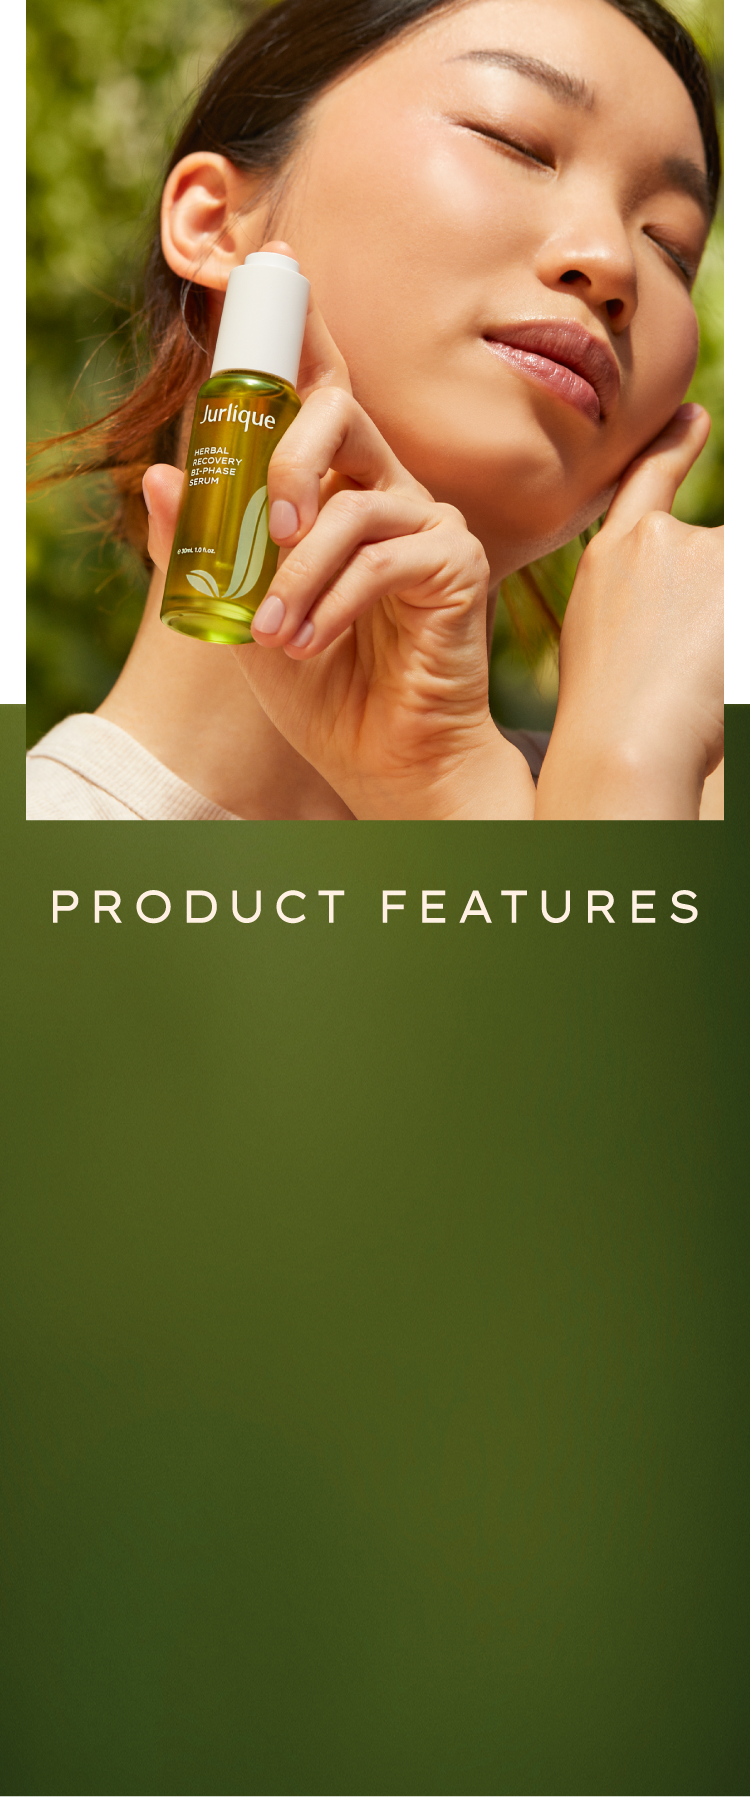 PRODUCT FEATURES